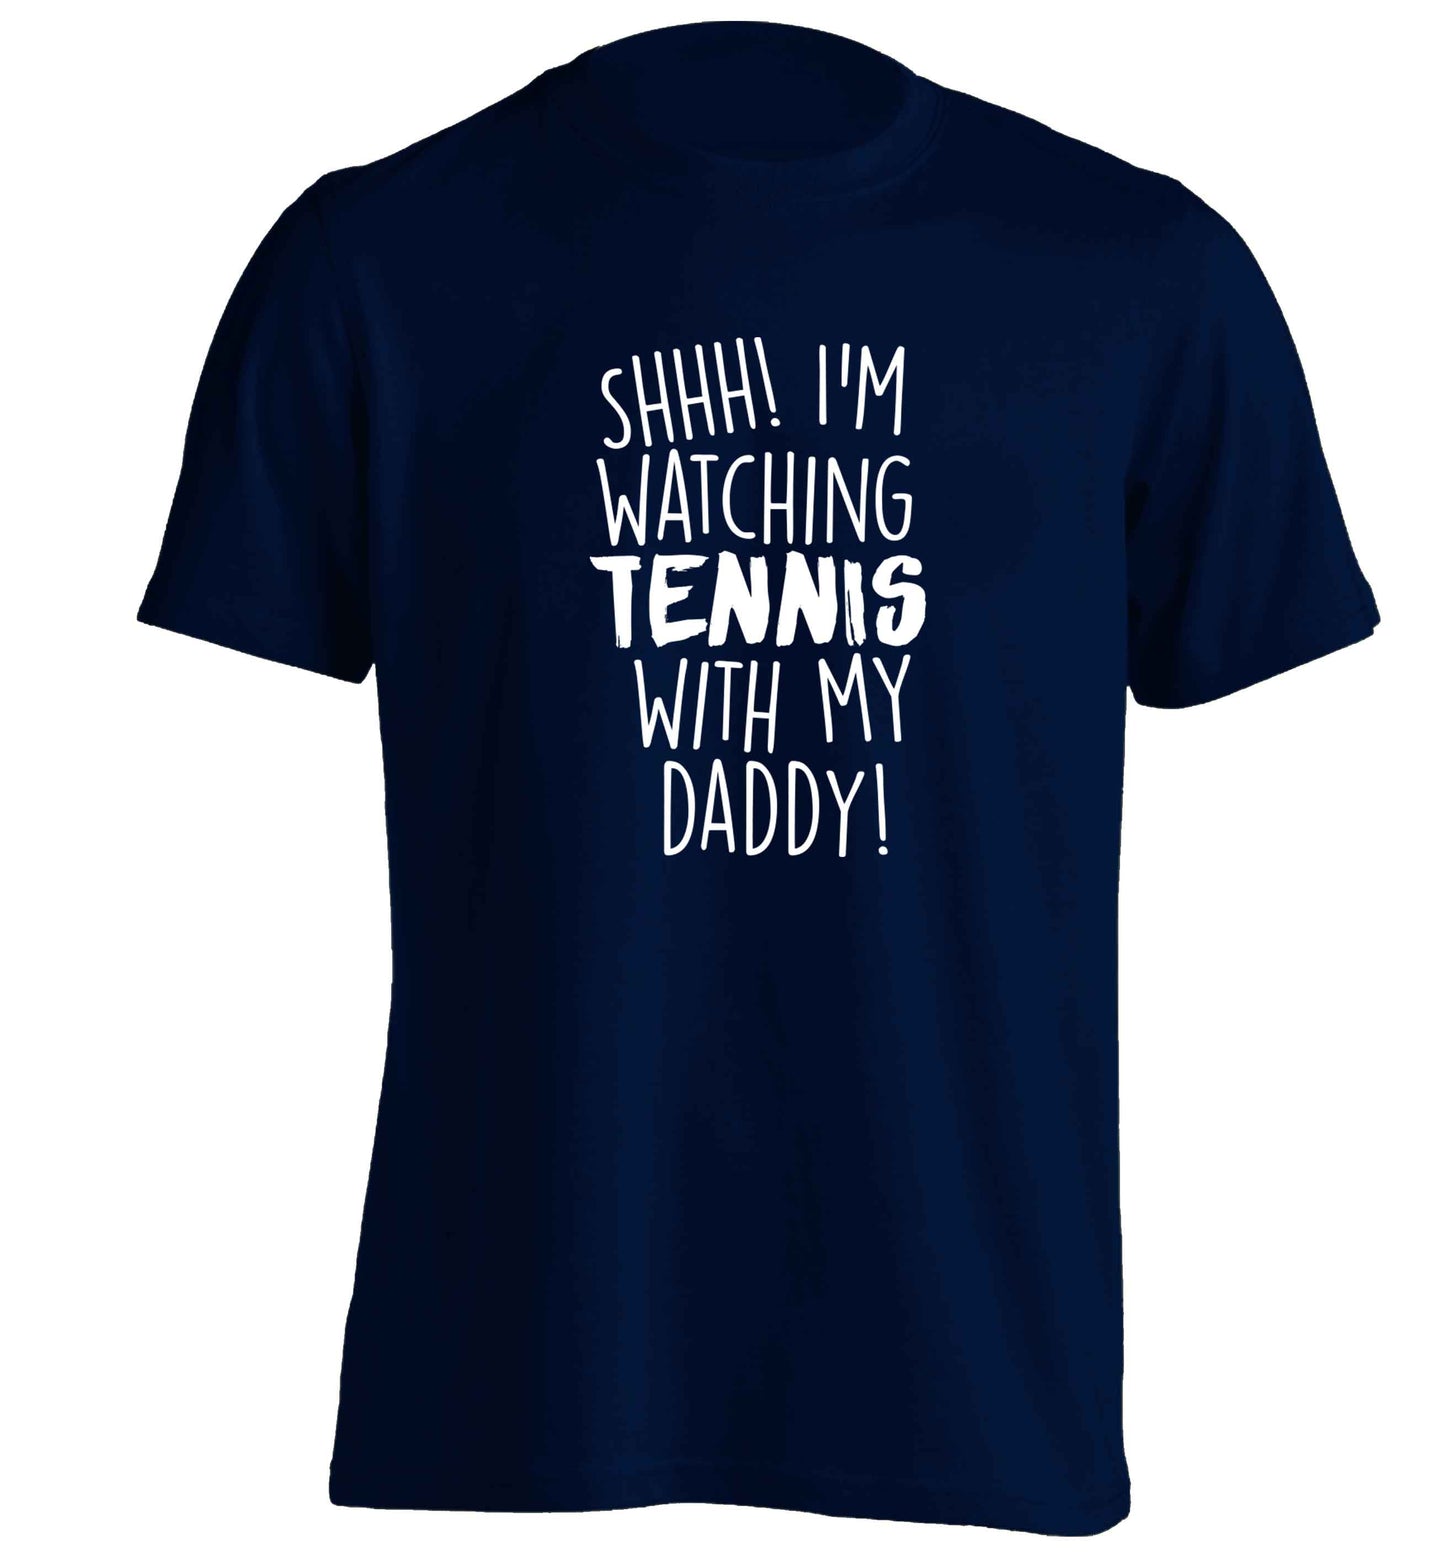 Shh! I'm watching tennis with my daddy! adults unisex navy Tshirt 2XL